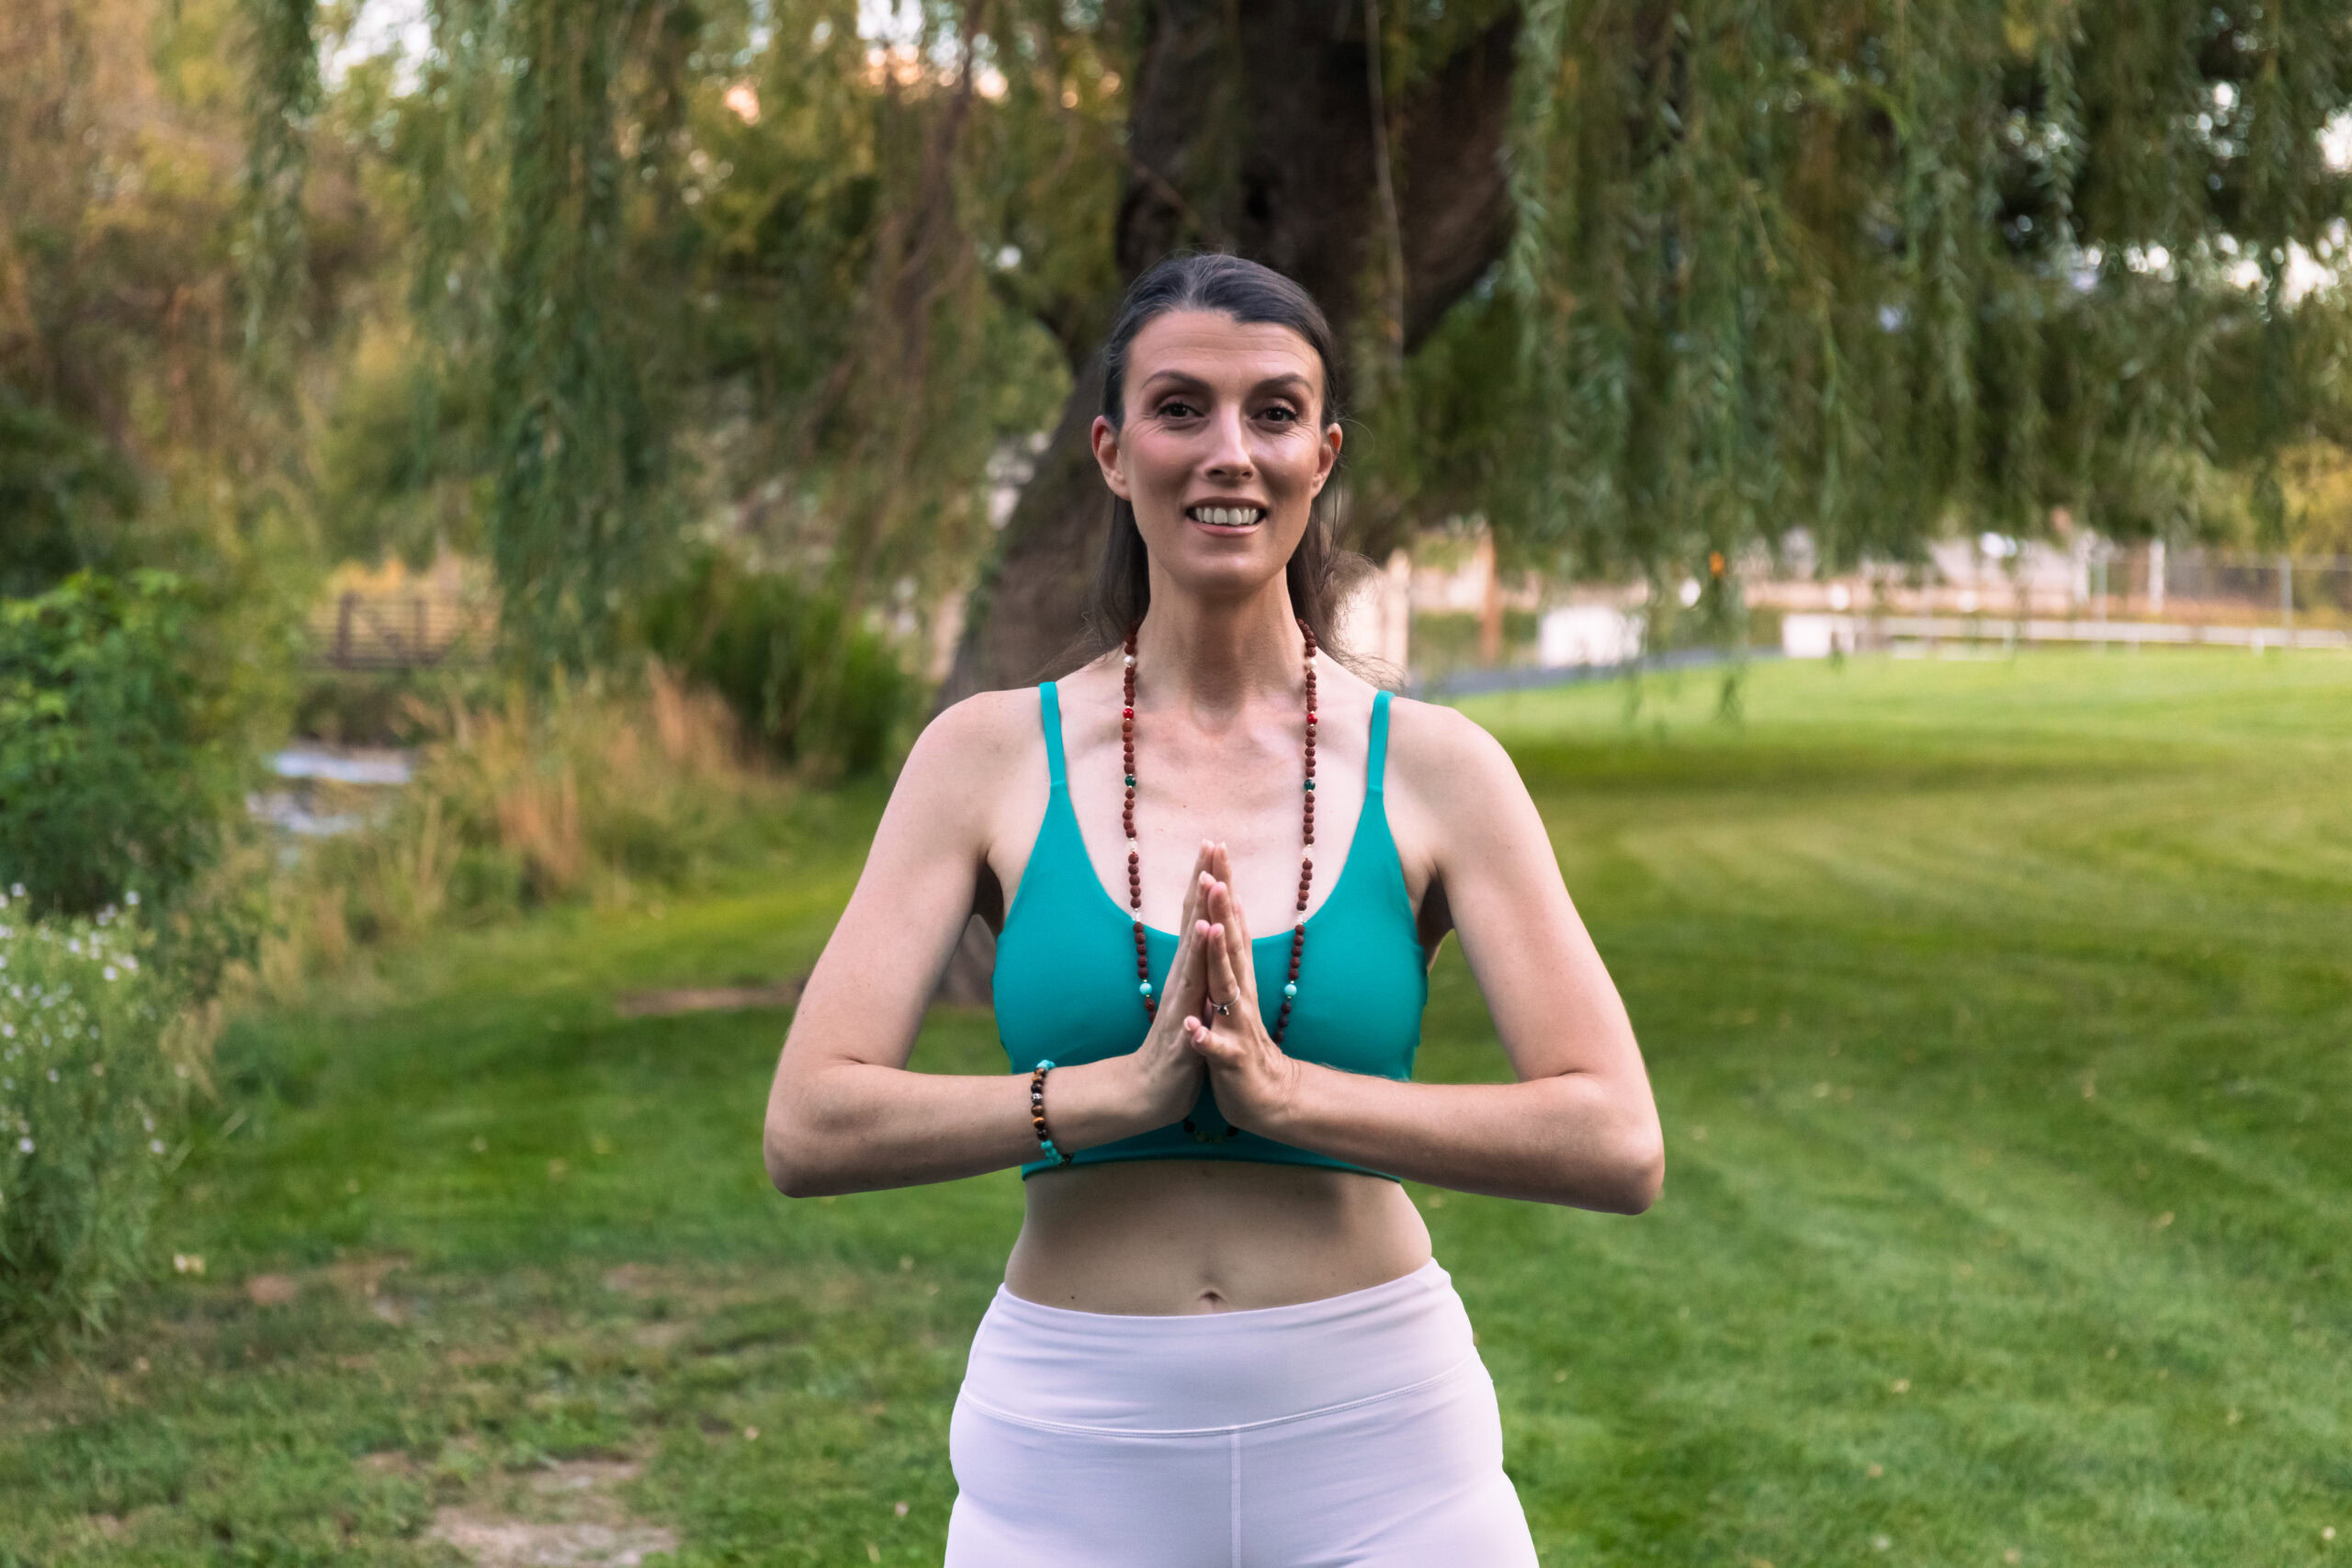 Danae wearing a green top and white leggings stands outside in a yoga pose with hands pressed together, practicing Danae Robinett Breathwork against a backdrop of greenery and trees.